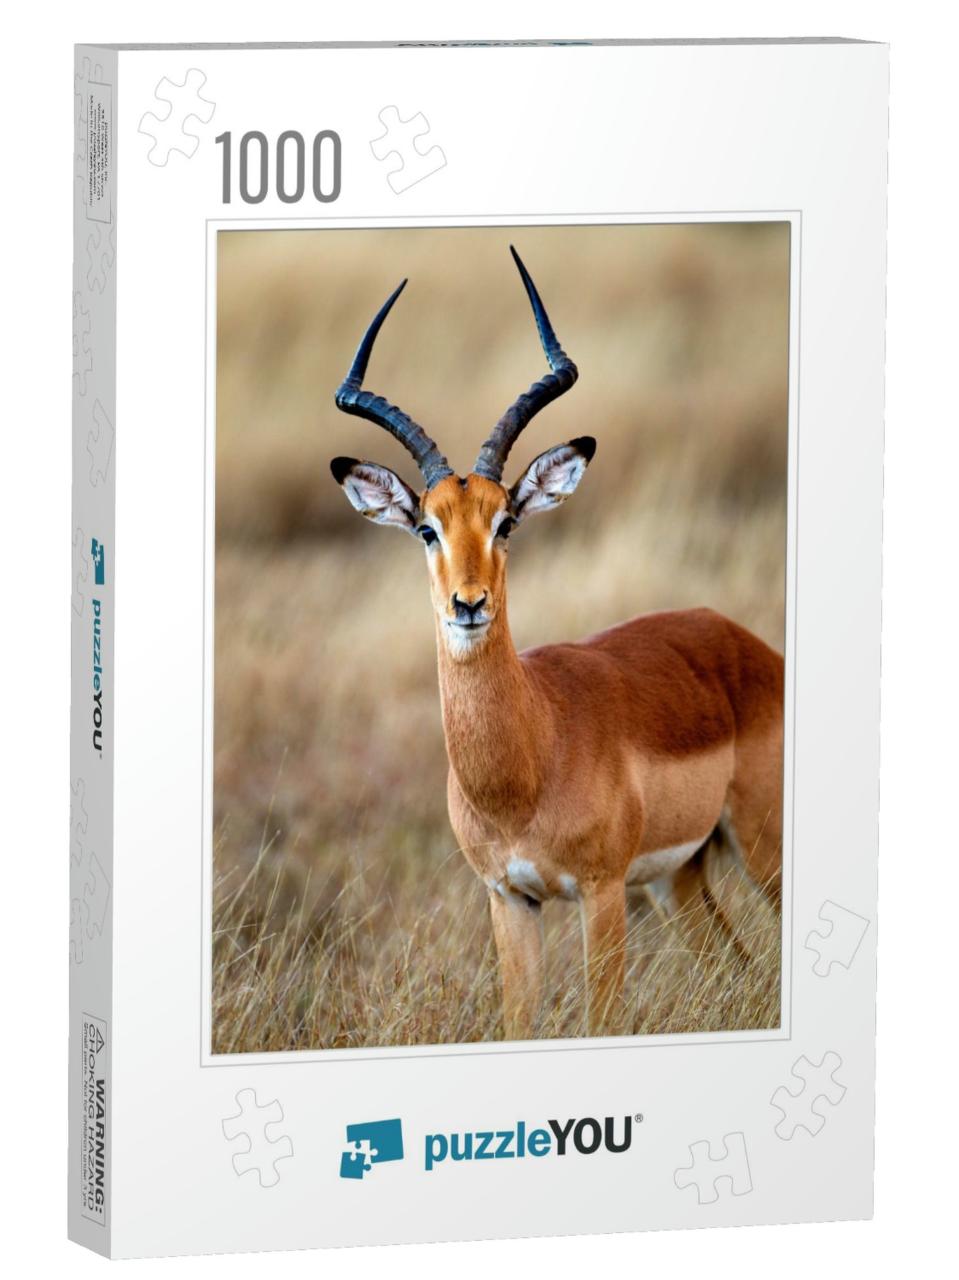 Impala Aepyceros Melampus - Male, Kruger National Park, S... Jigsaw Puzzle with 1000 pieces